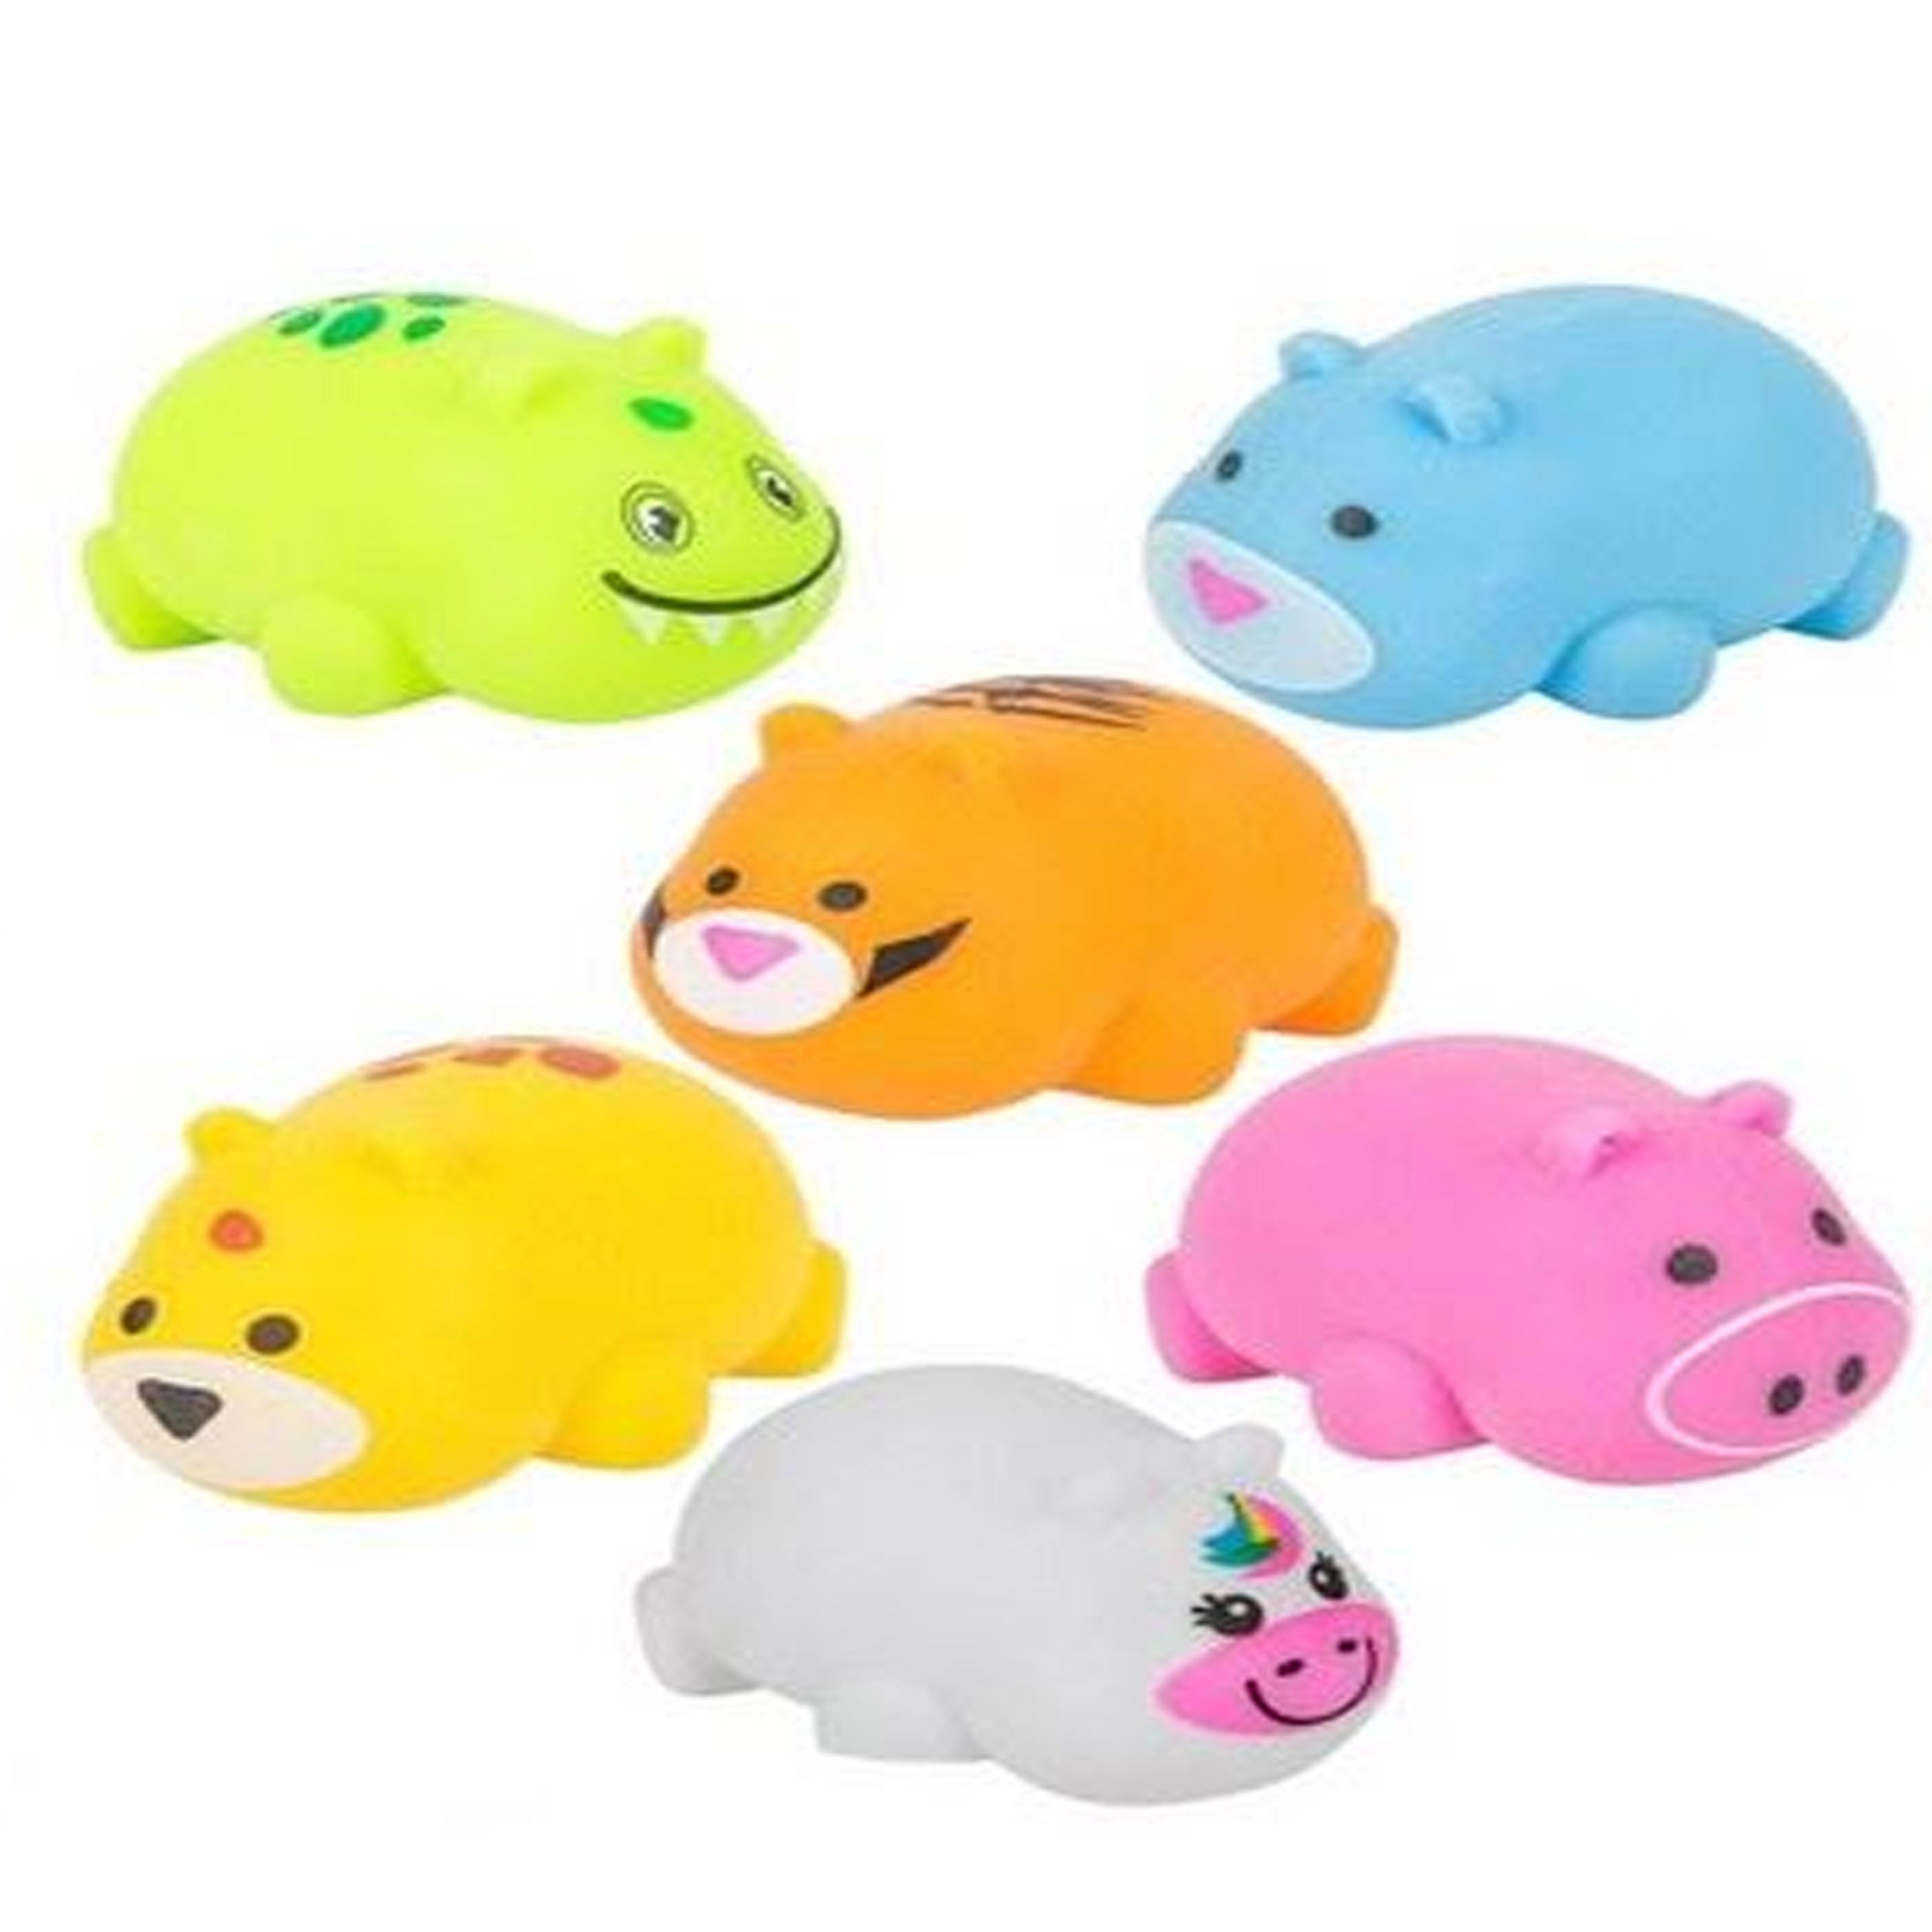 Wholesale of Stress Relief Toys Assorted Colors (MOQ-12)